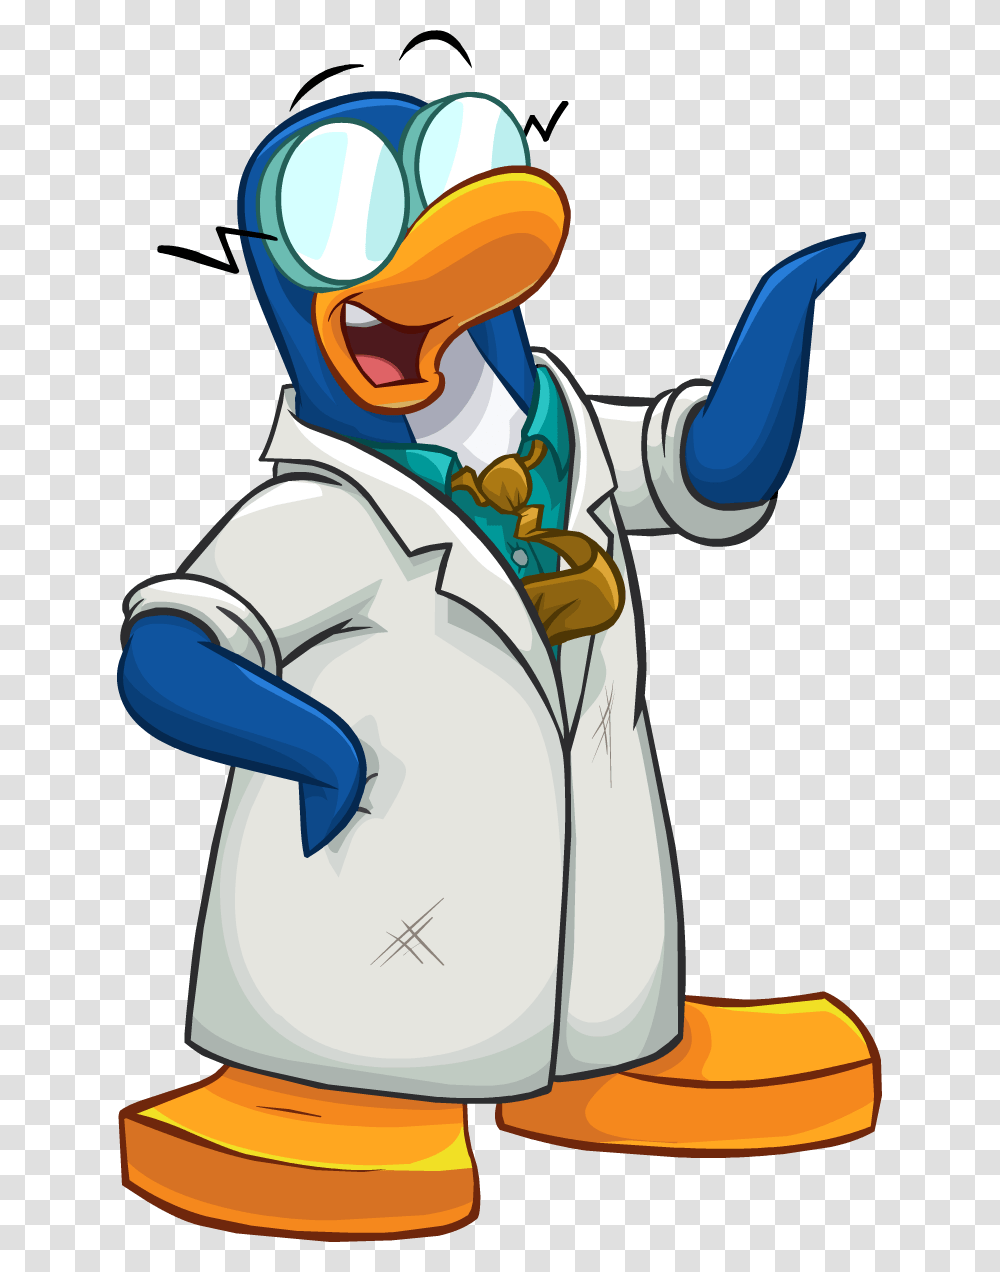 Club Penguin Again Wiki Gary From Club Penguin, Performer, Hand, Astronaut Transparent Png